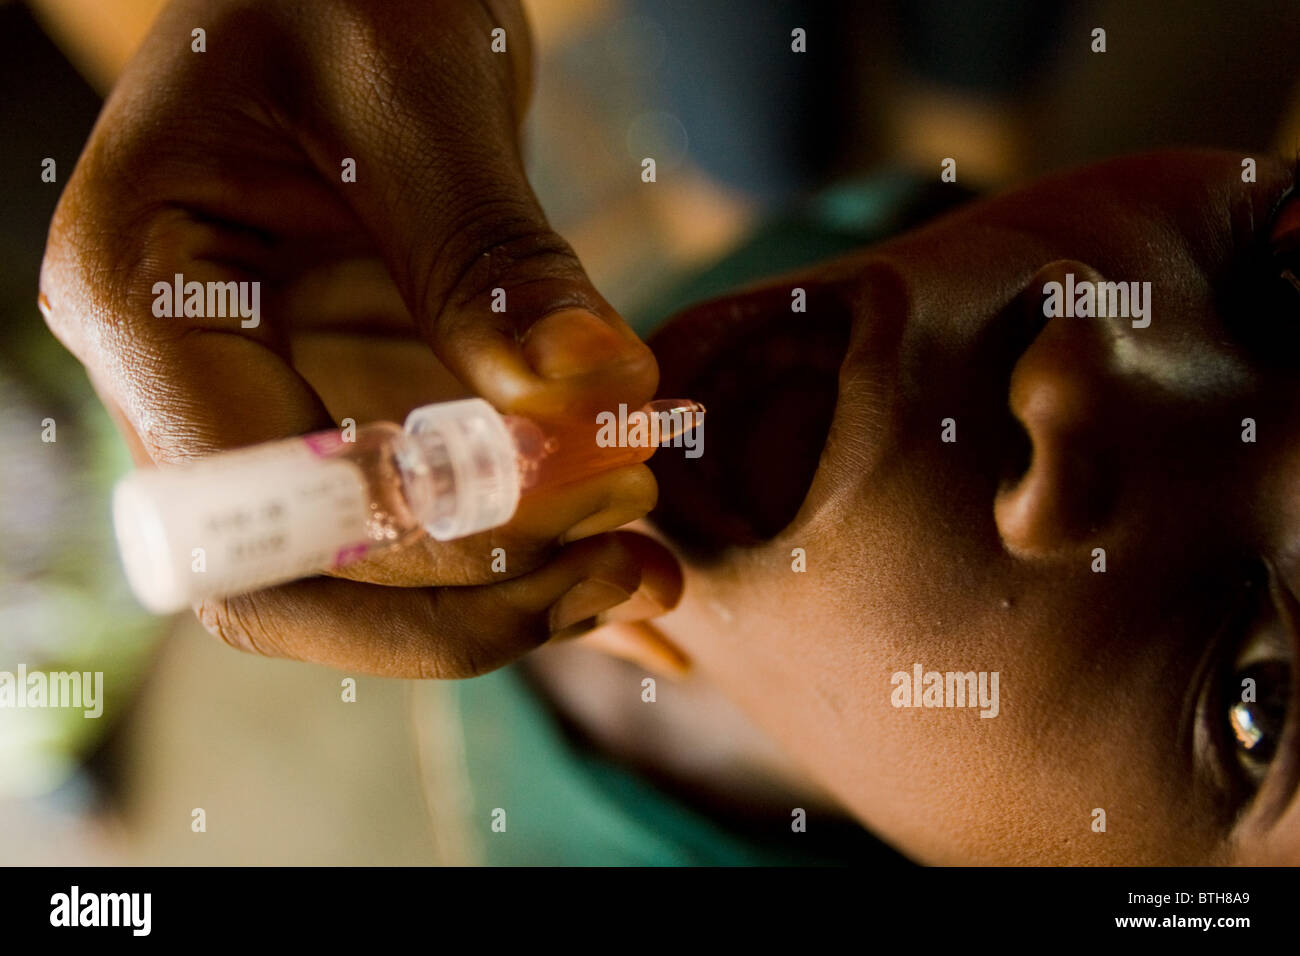 A health worker vaccinates a child during a national polio immunization exercise Stock Photo